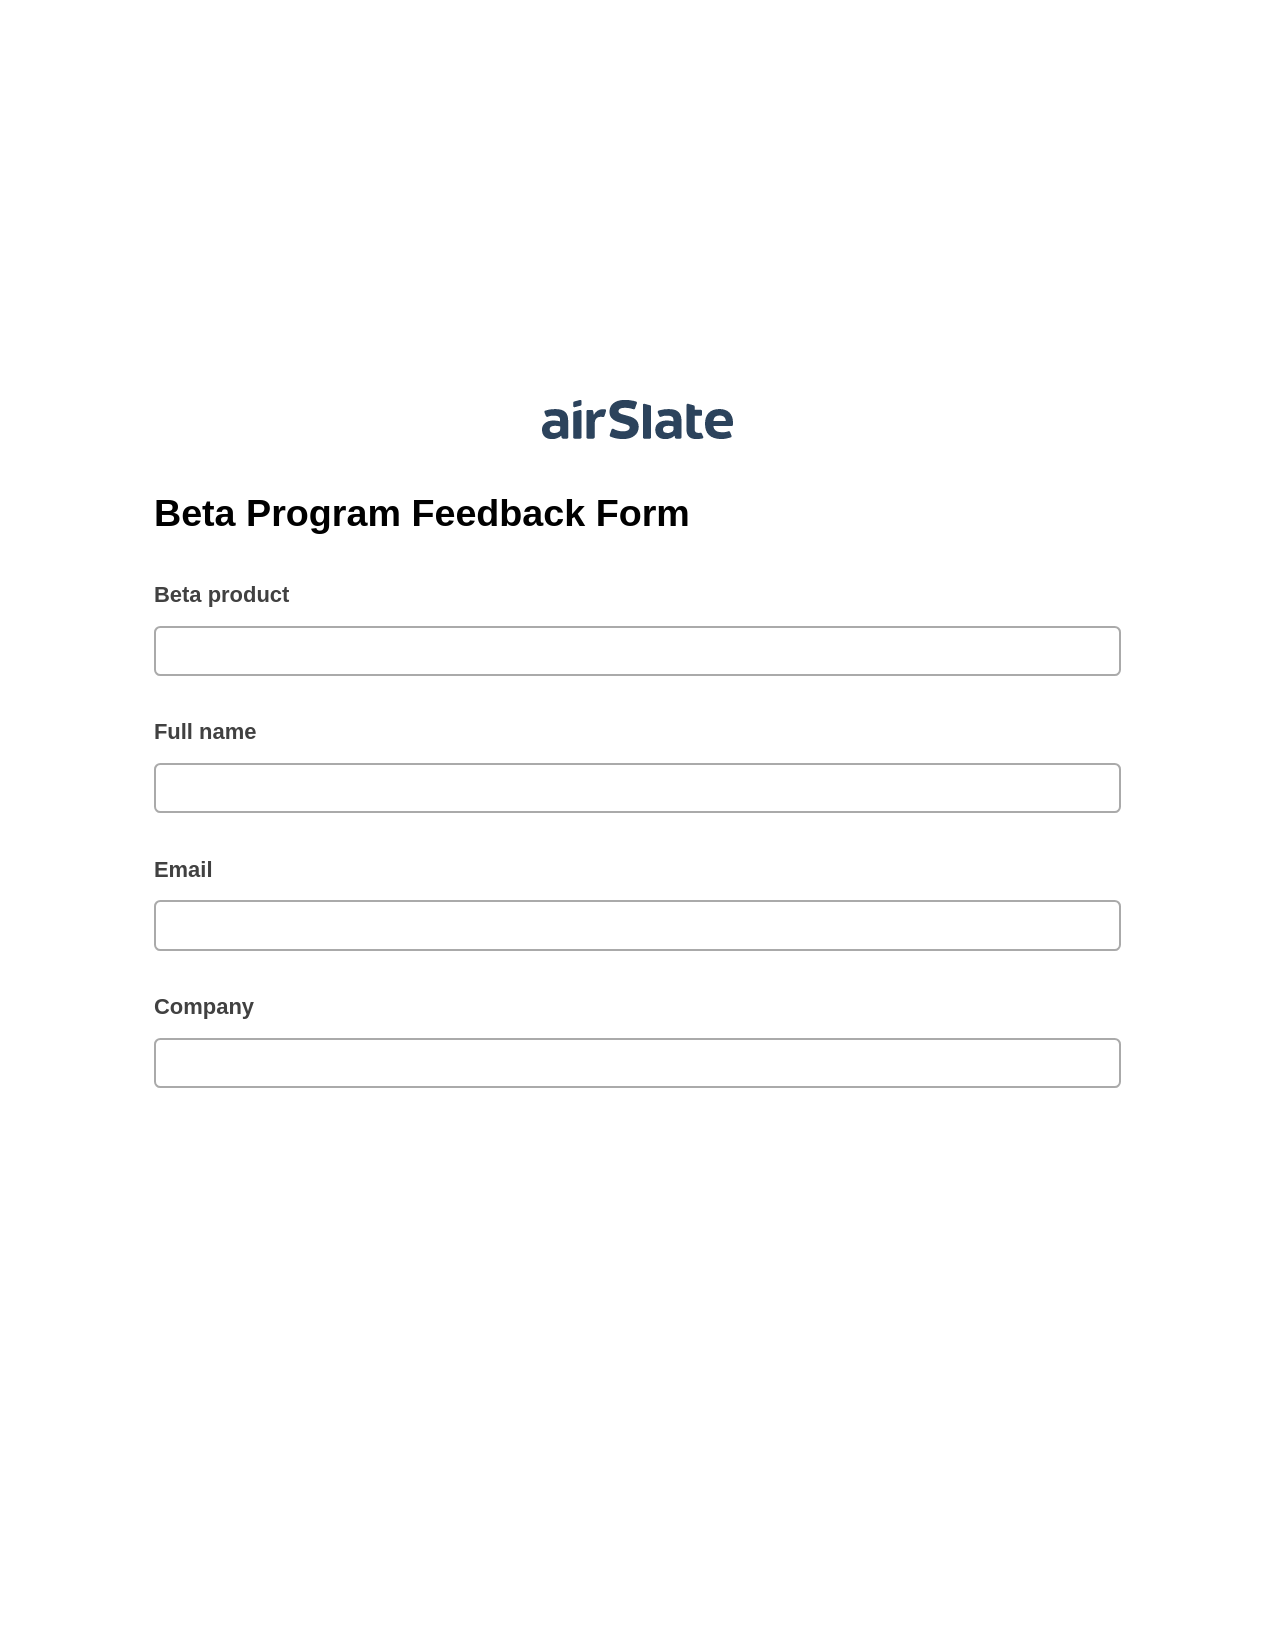 Multirole Beta Program Feedback Form Pre-fill from Salesforce Record Bot, Send a Slate with Roles Bot, Export to Formstack Documents Bot